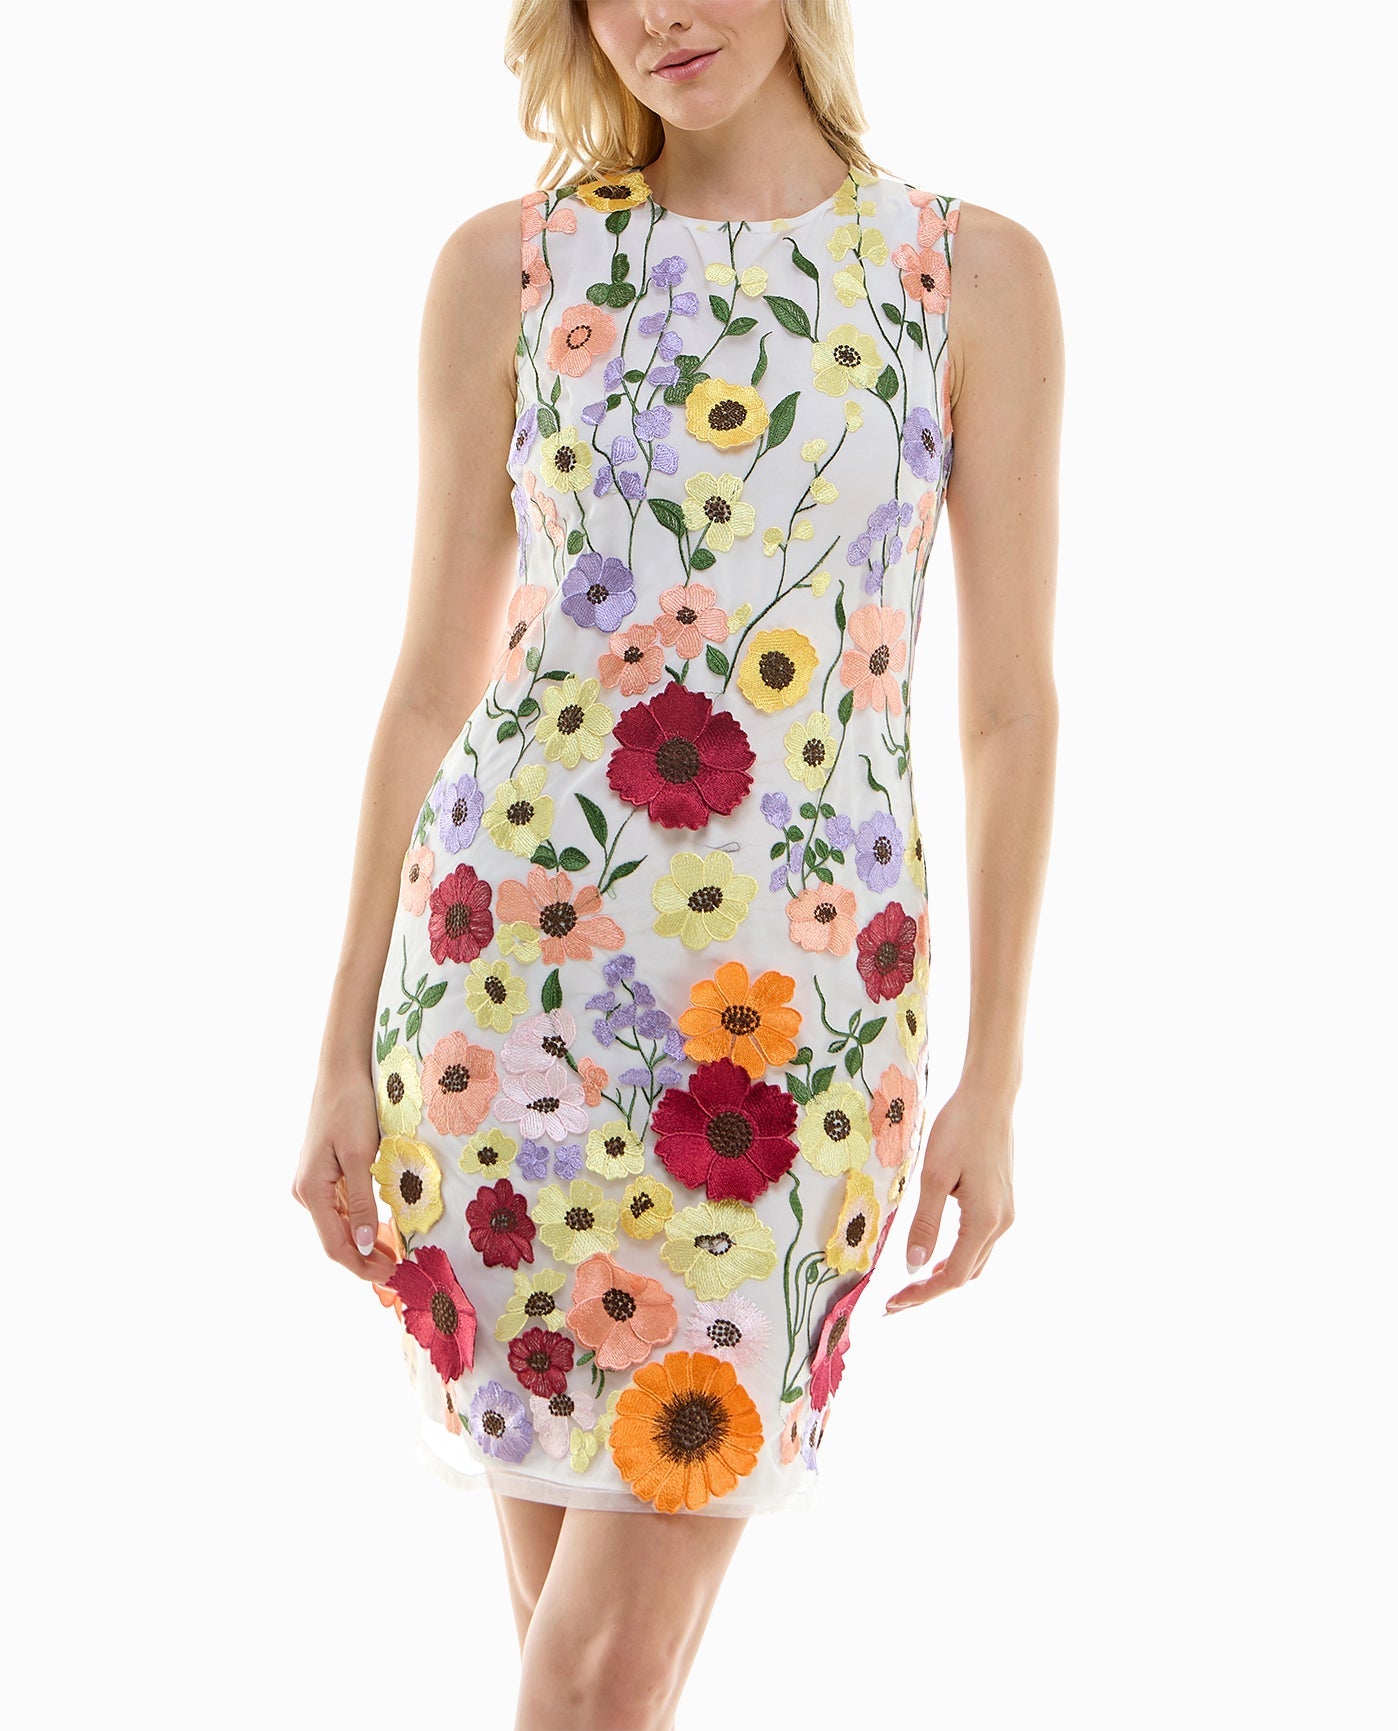 ZOOMED IN FRONT OF FLORA APPLIQUE MESH SHEATH DRESS | Wild Multicolor